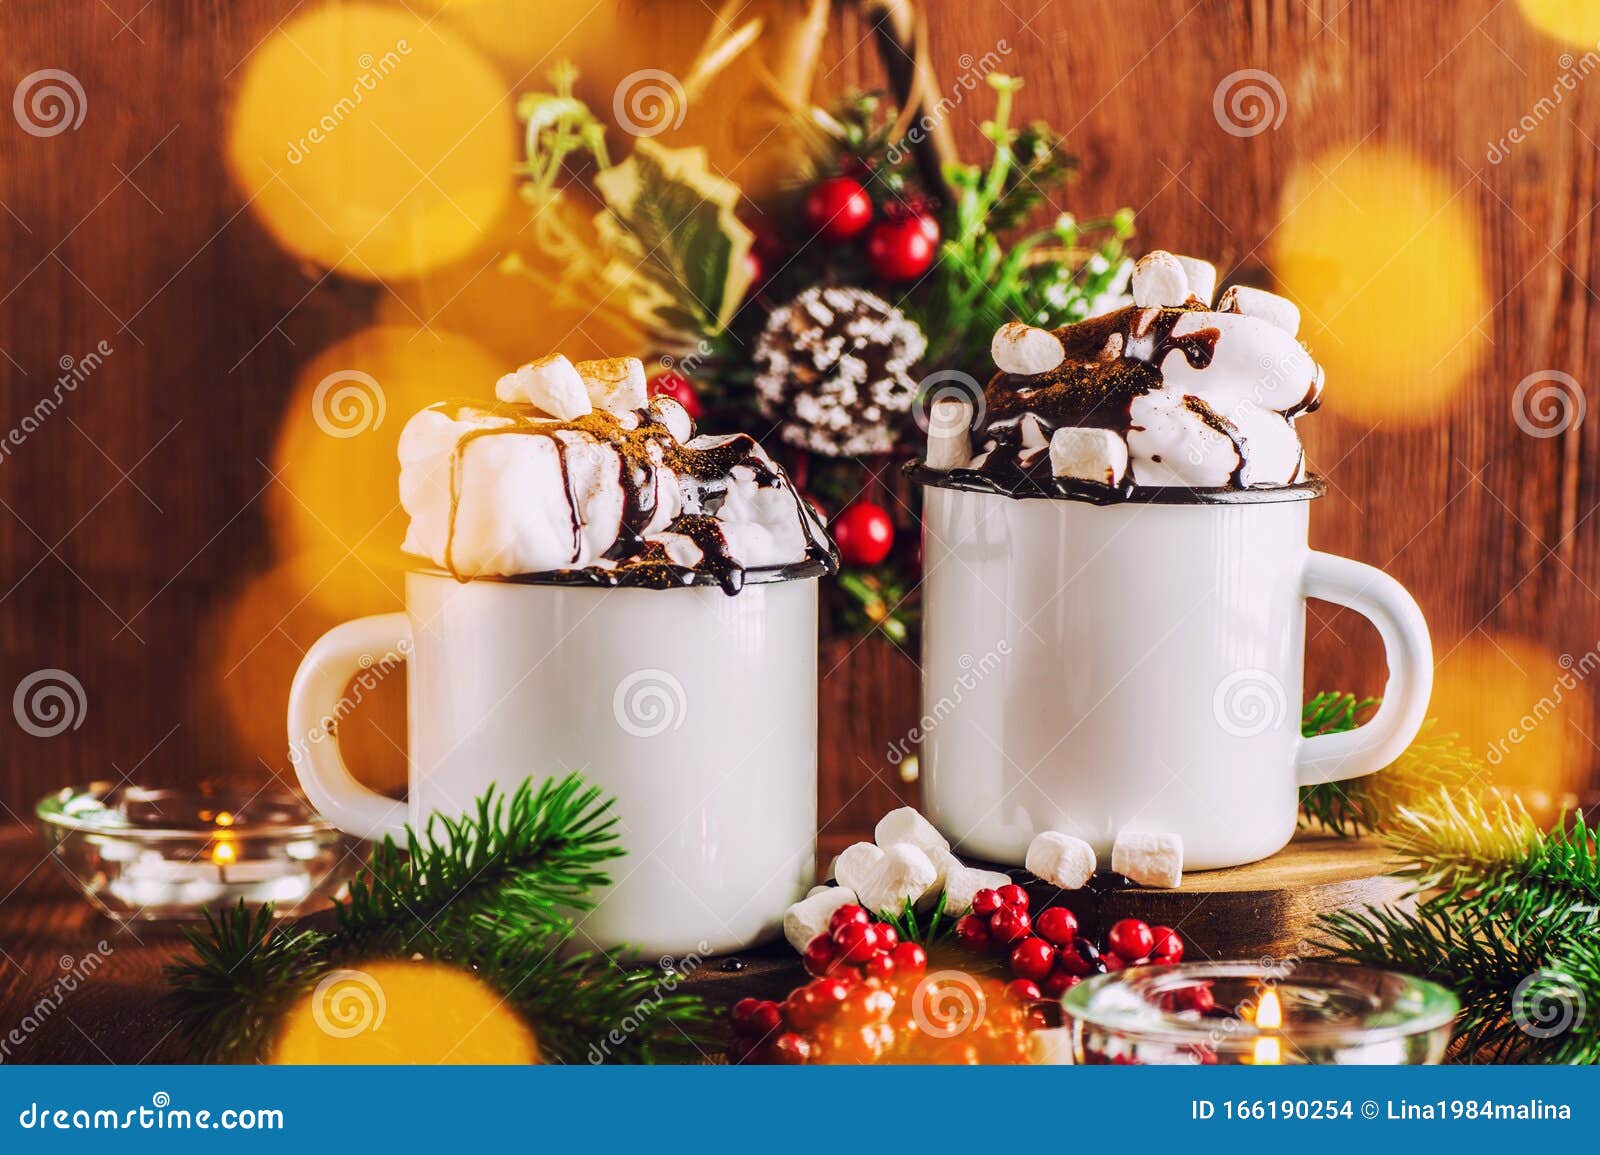 Hot drinks. Winter Christmas mugs background, holiday cocoa coffee cho By  ONYX